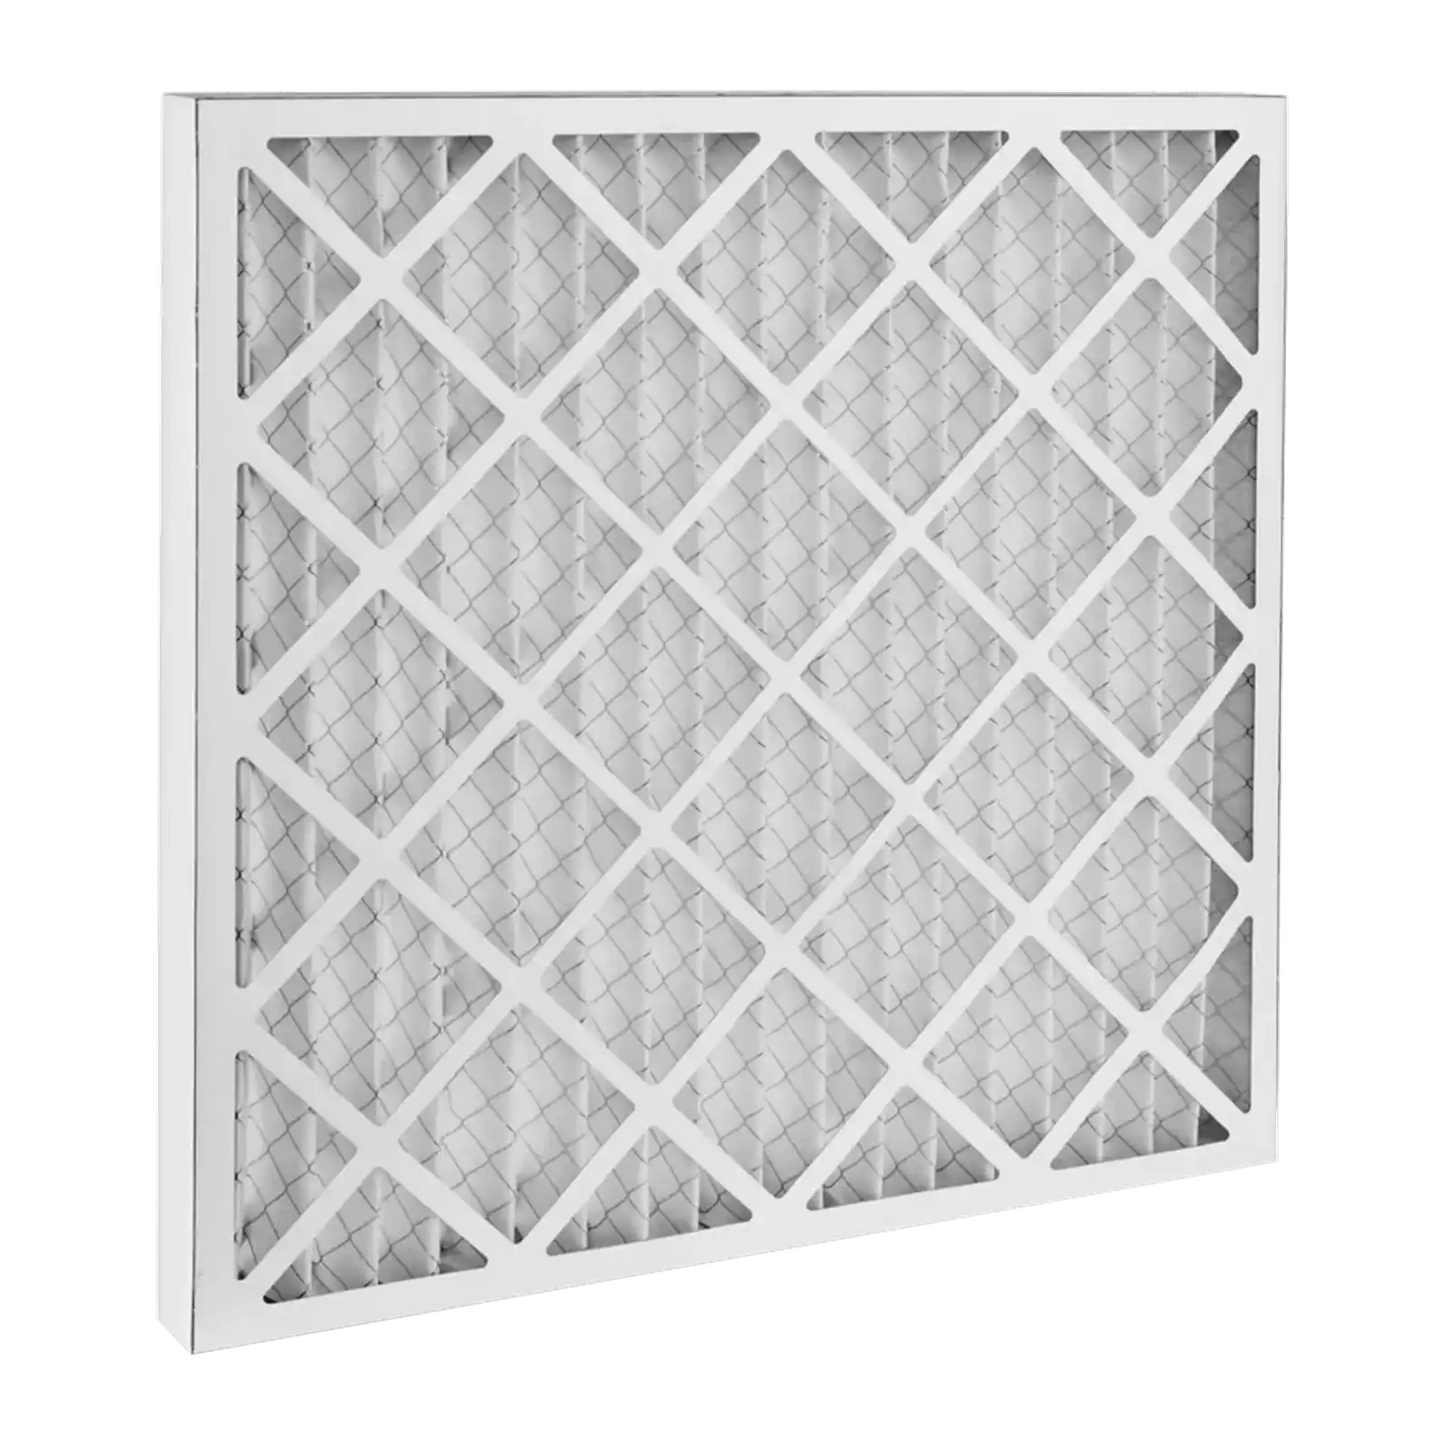 Dafco 18x18x1 Furnace AC Filter - Case of 12